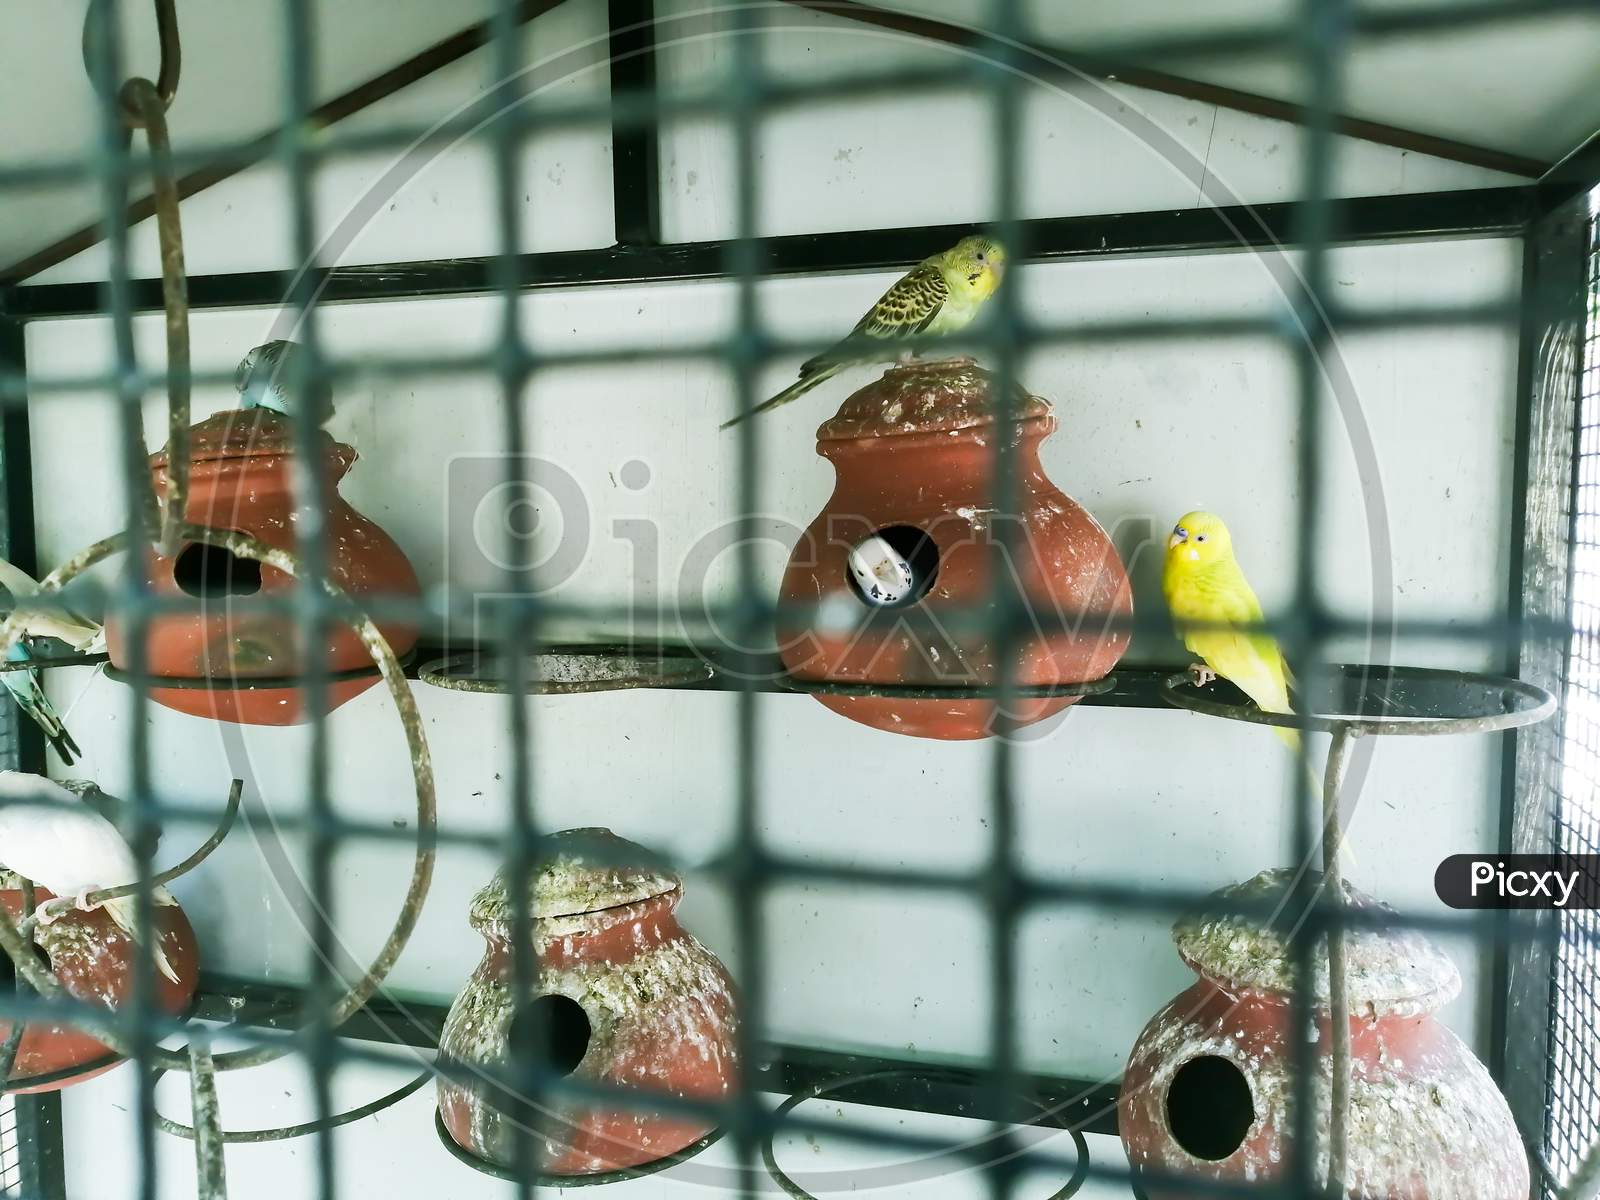 There Are Couple Of Lovebirds In Its Cage.